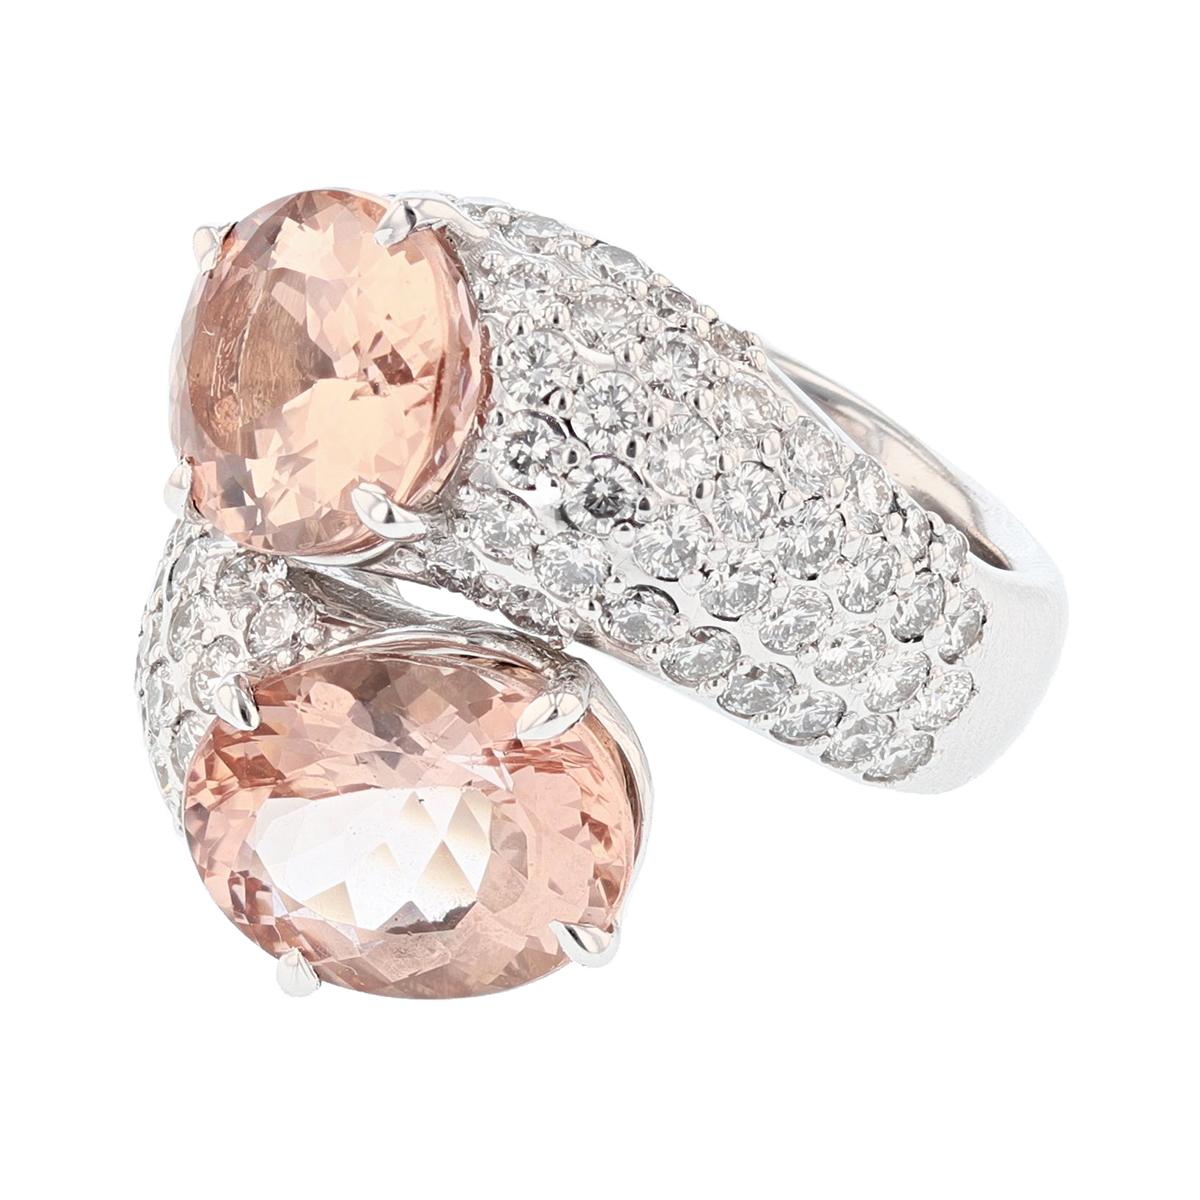 Contemporary Nazarelle 14 Karat Gold Double Oval 9.74 Carat Morganite Diamond Cocktail Ring For Sale